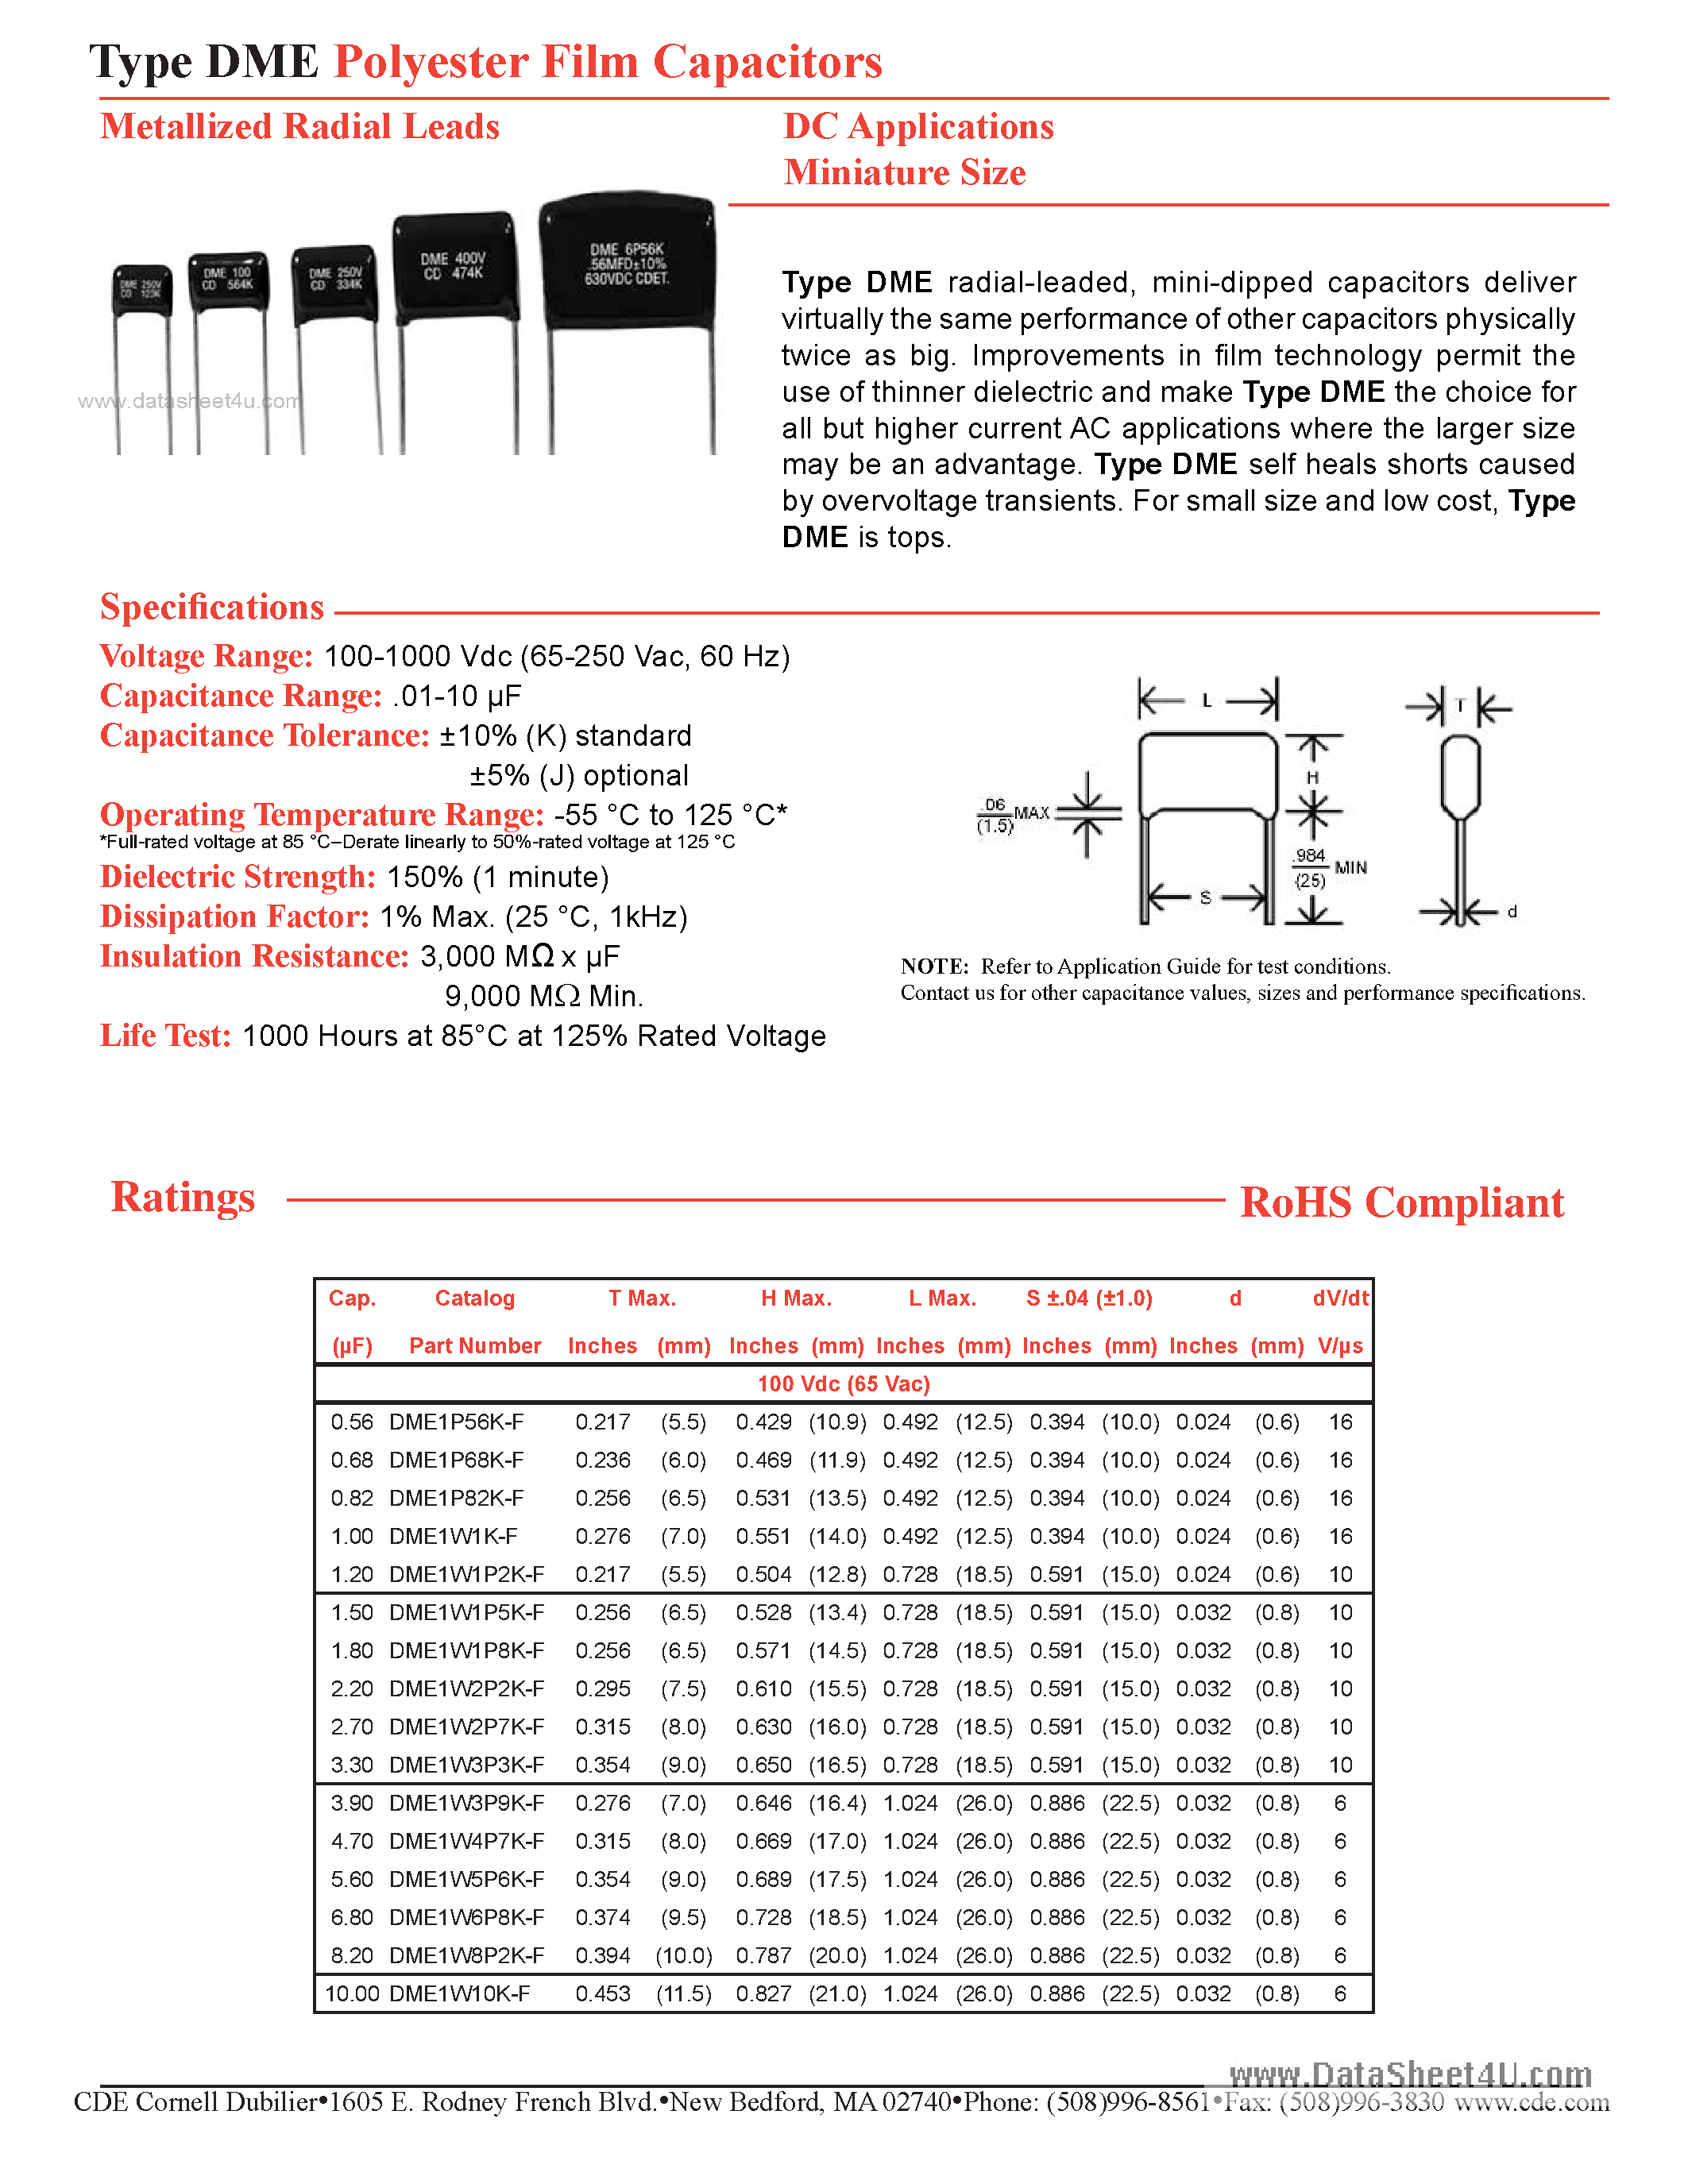 Datasheet DME10P12K-F - Polyester Film Capacitors Metallized Radial Leads page 1